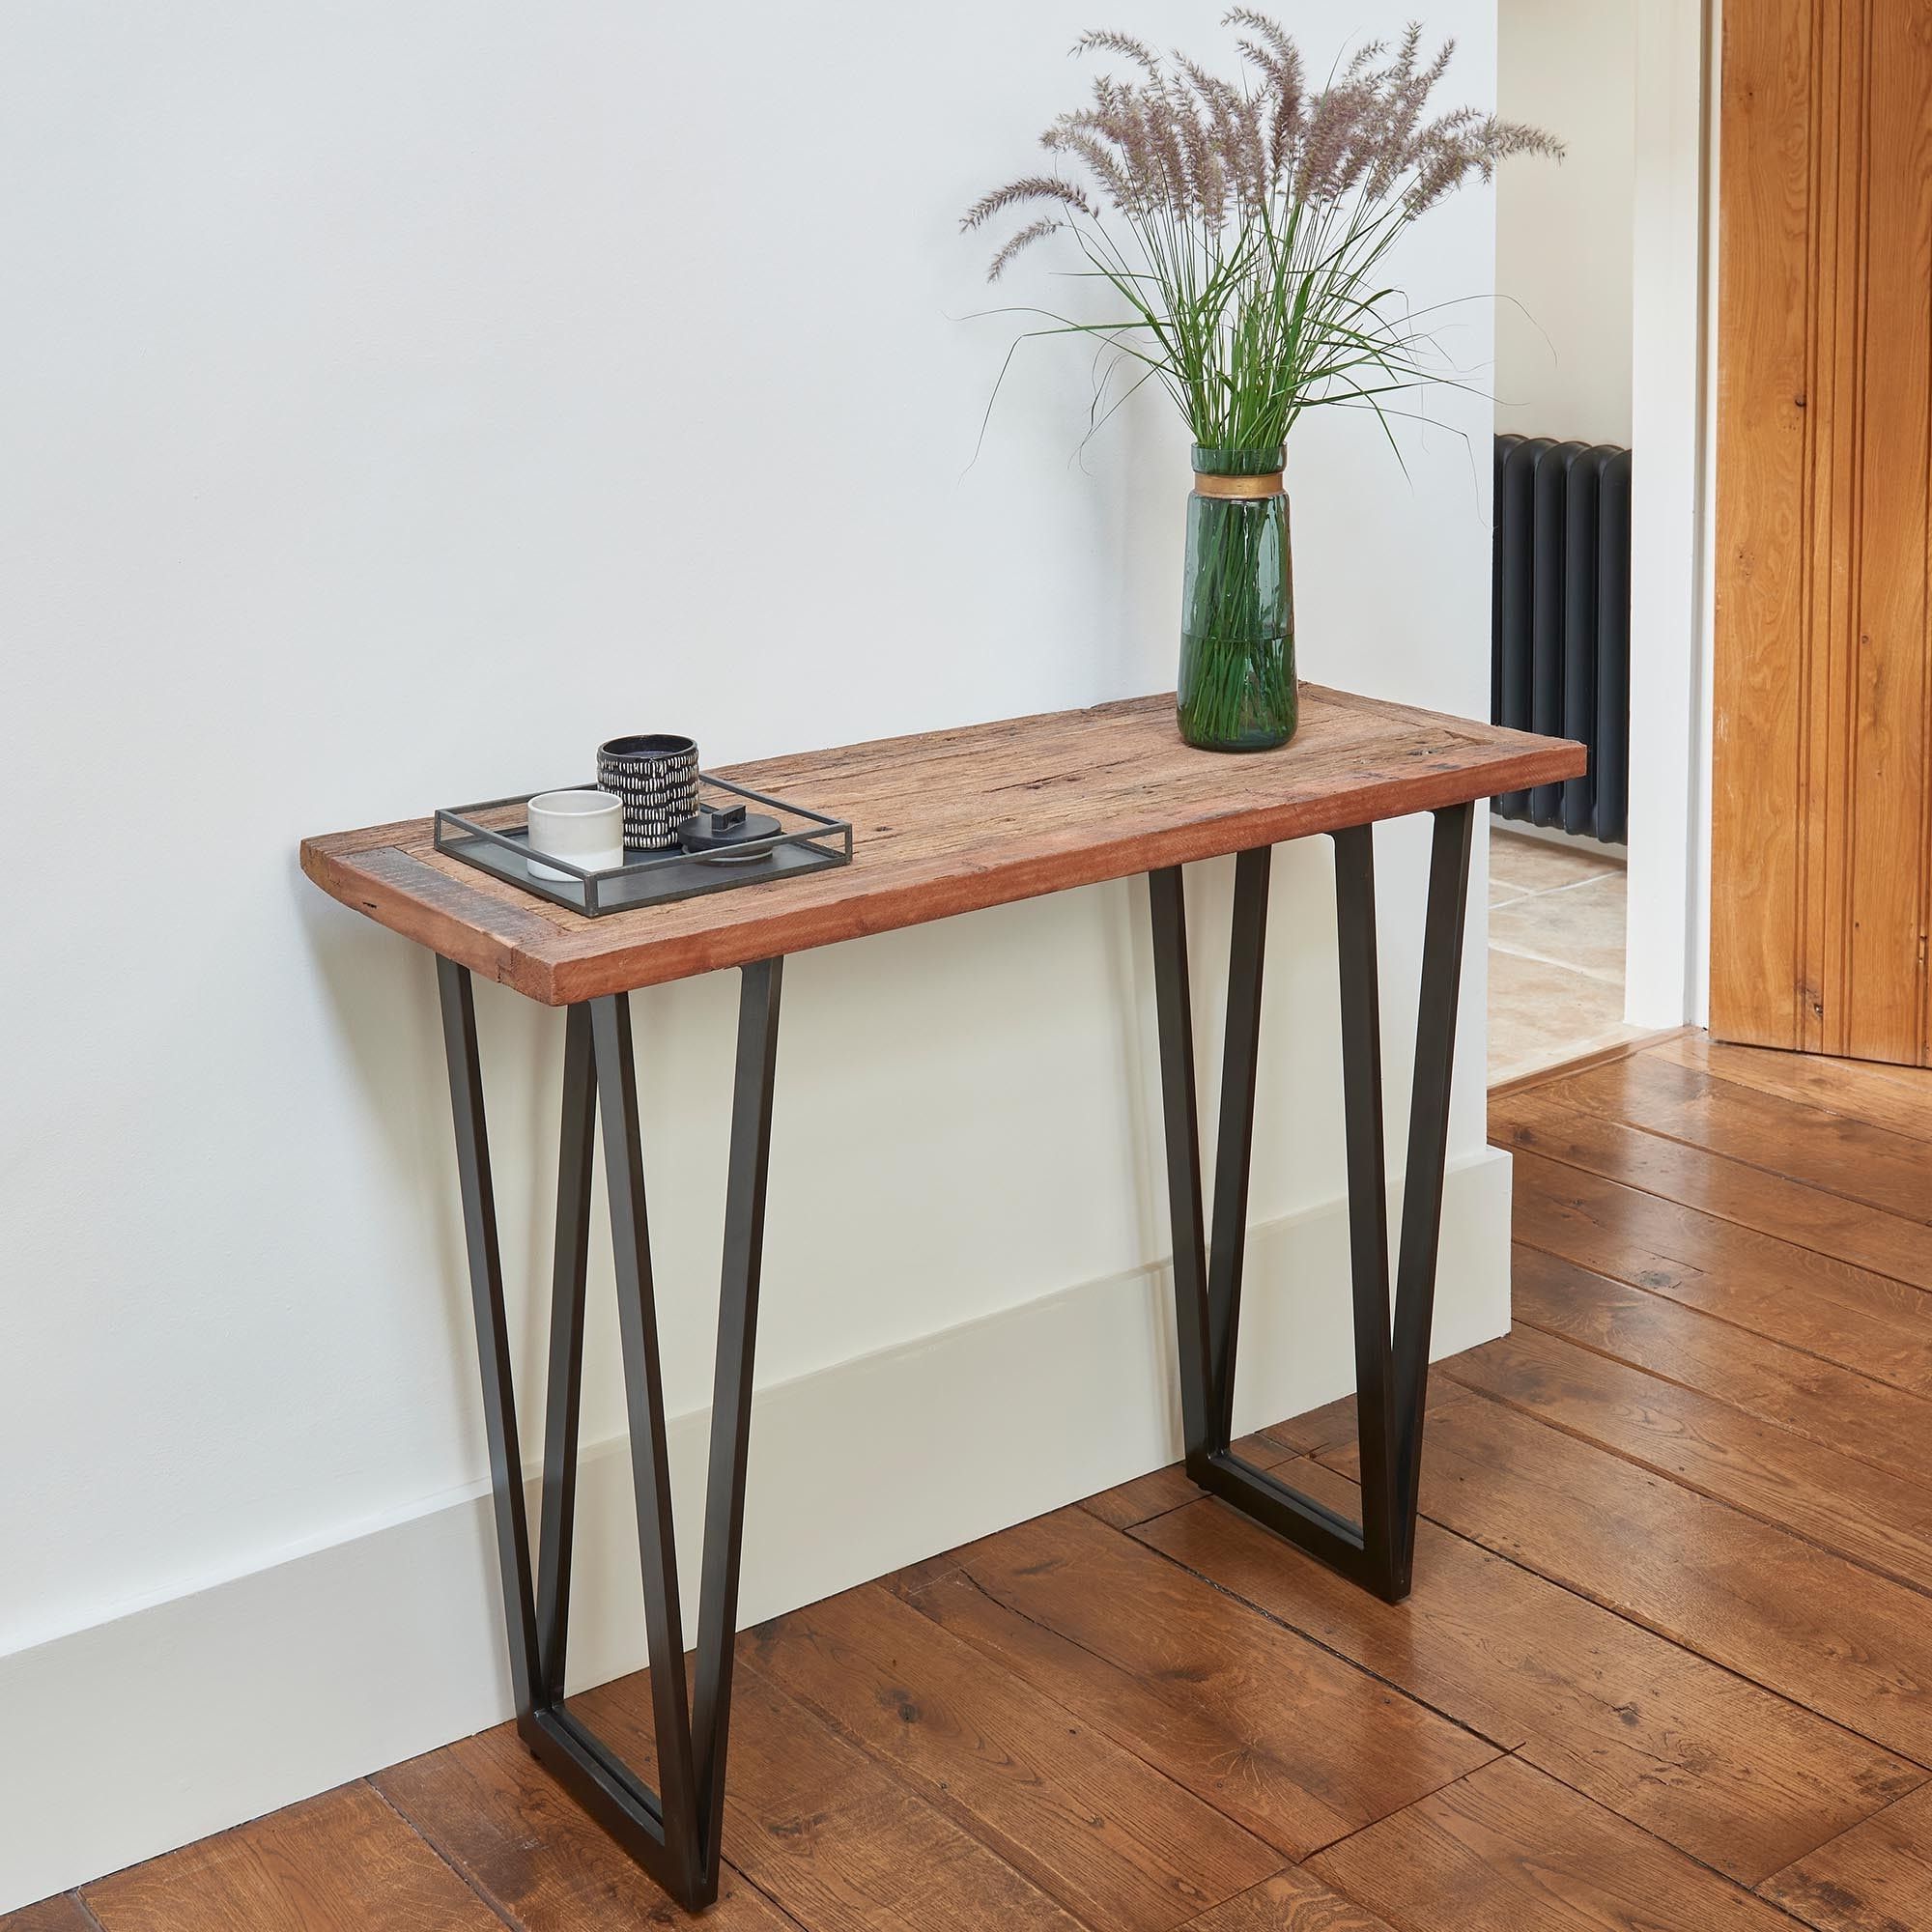 Console Table Regarding Well Known Wood Console Tables (View 3 of 10)